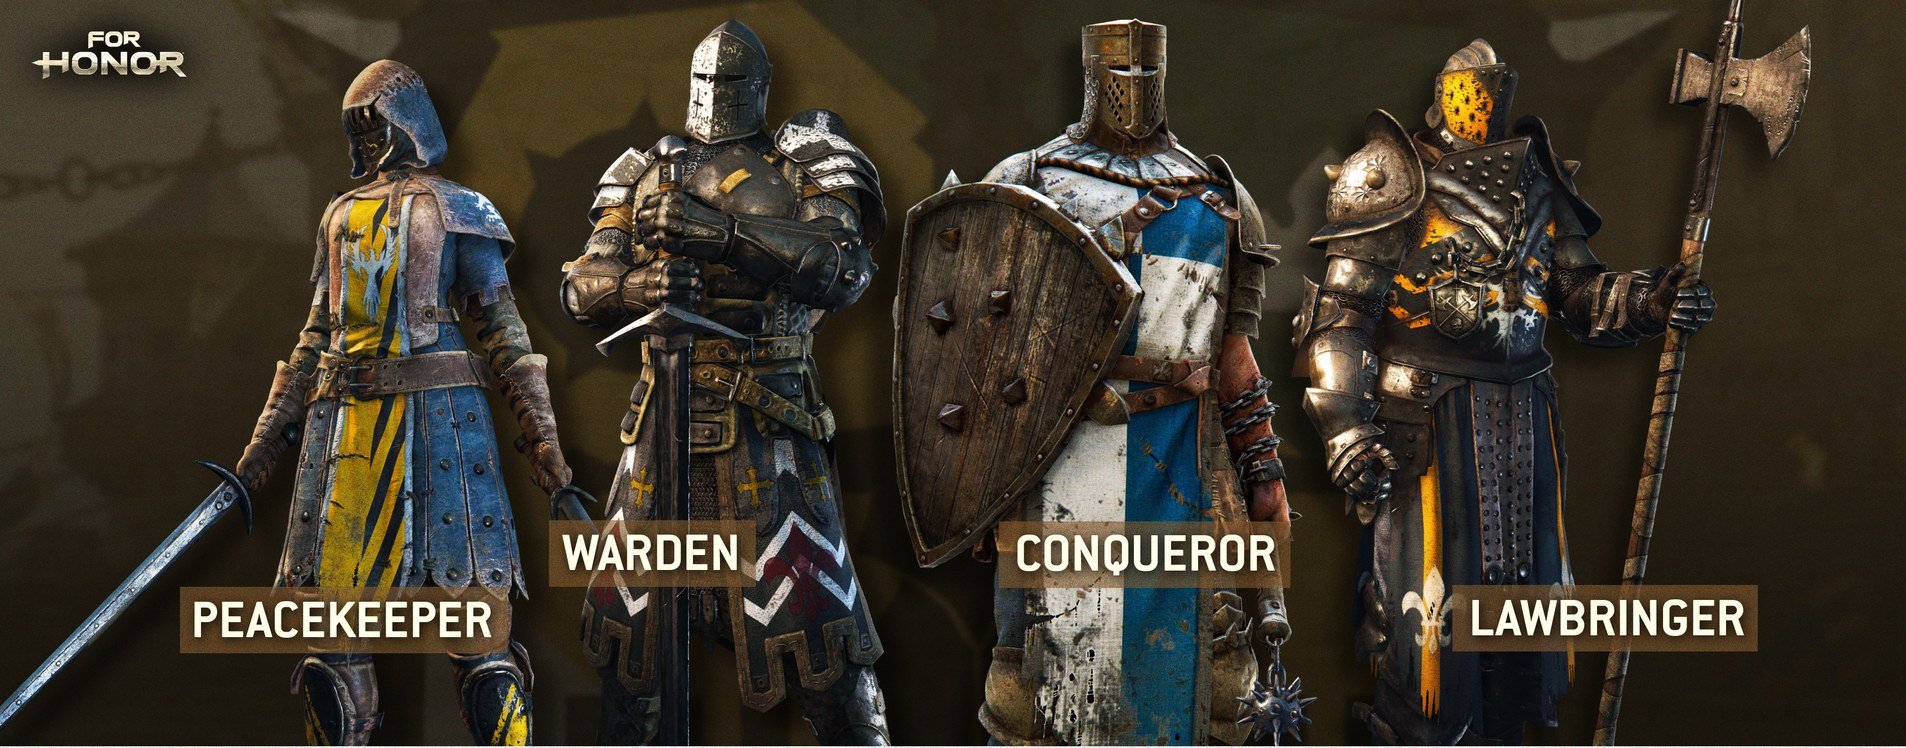 For Honor classes Knights